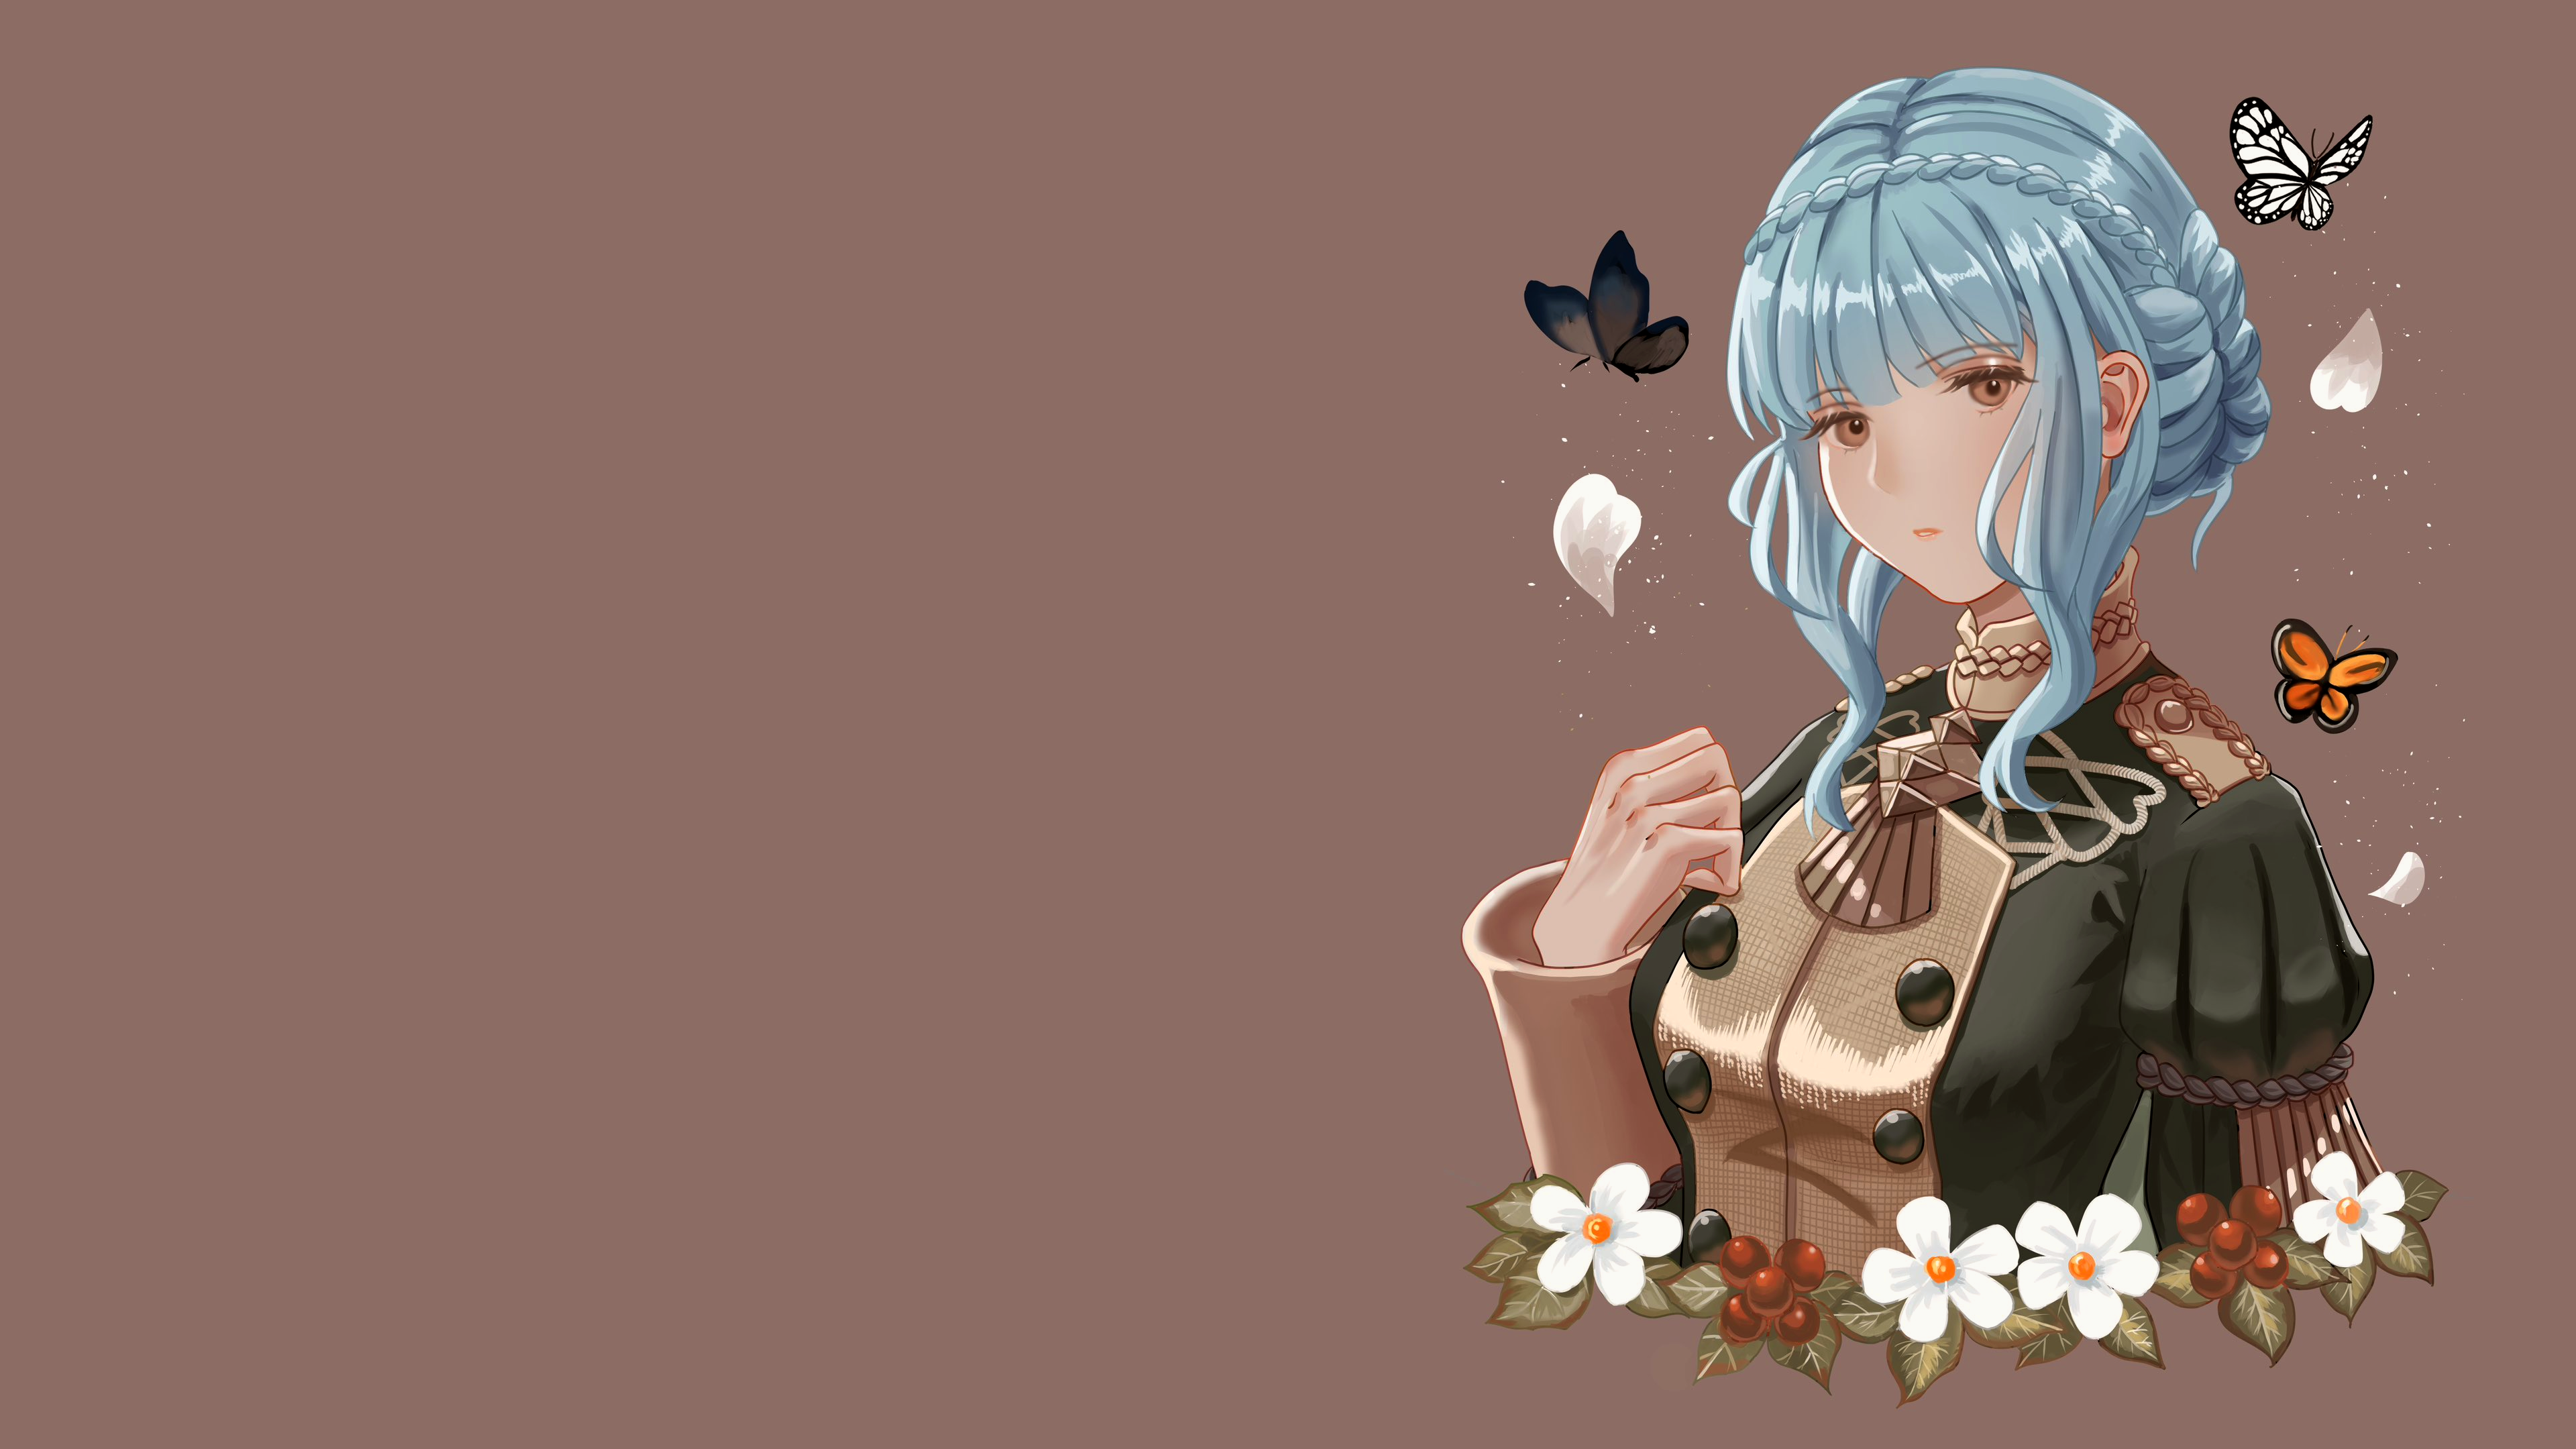 Anime 3840x2160 Nintendo video games video game girls simple background long hair blue hair brown eyes sidelocks marianne von edmund (Fire Emblem) fire emblem three houses Fire Emblem bangs blunt bangs flowers petals butterfly insect uniform brown background